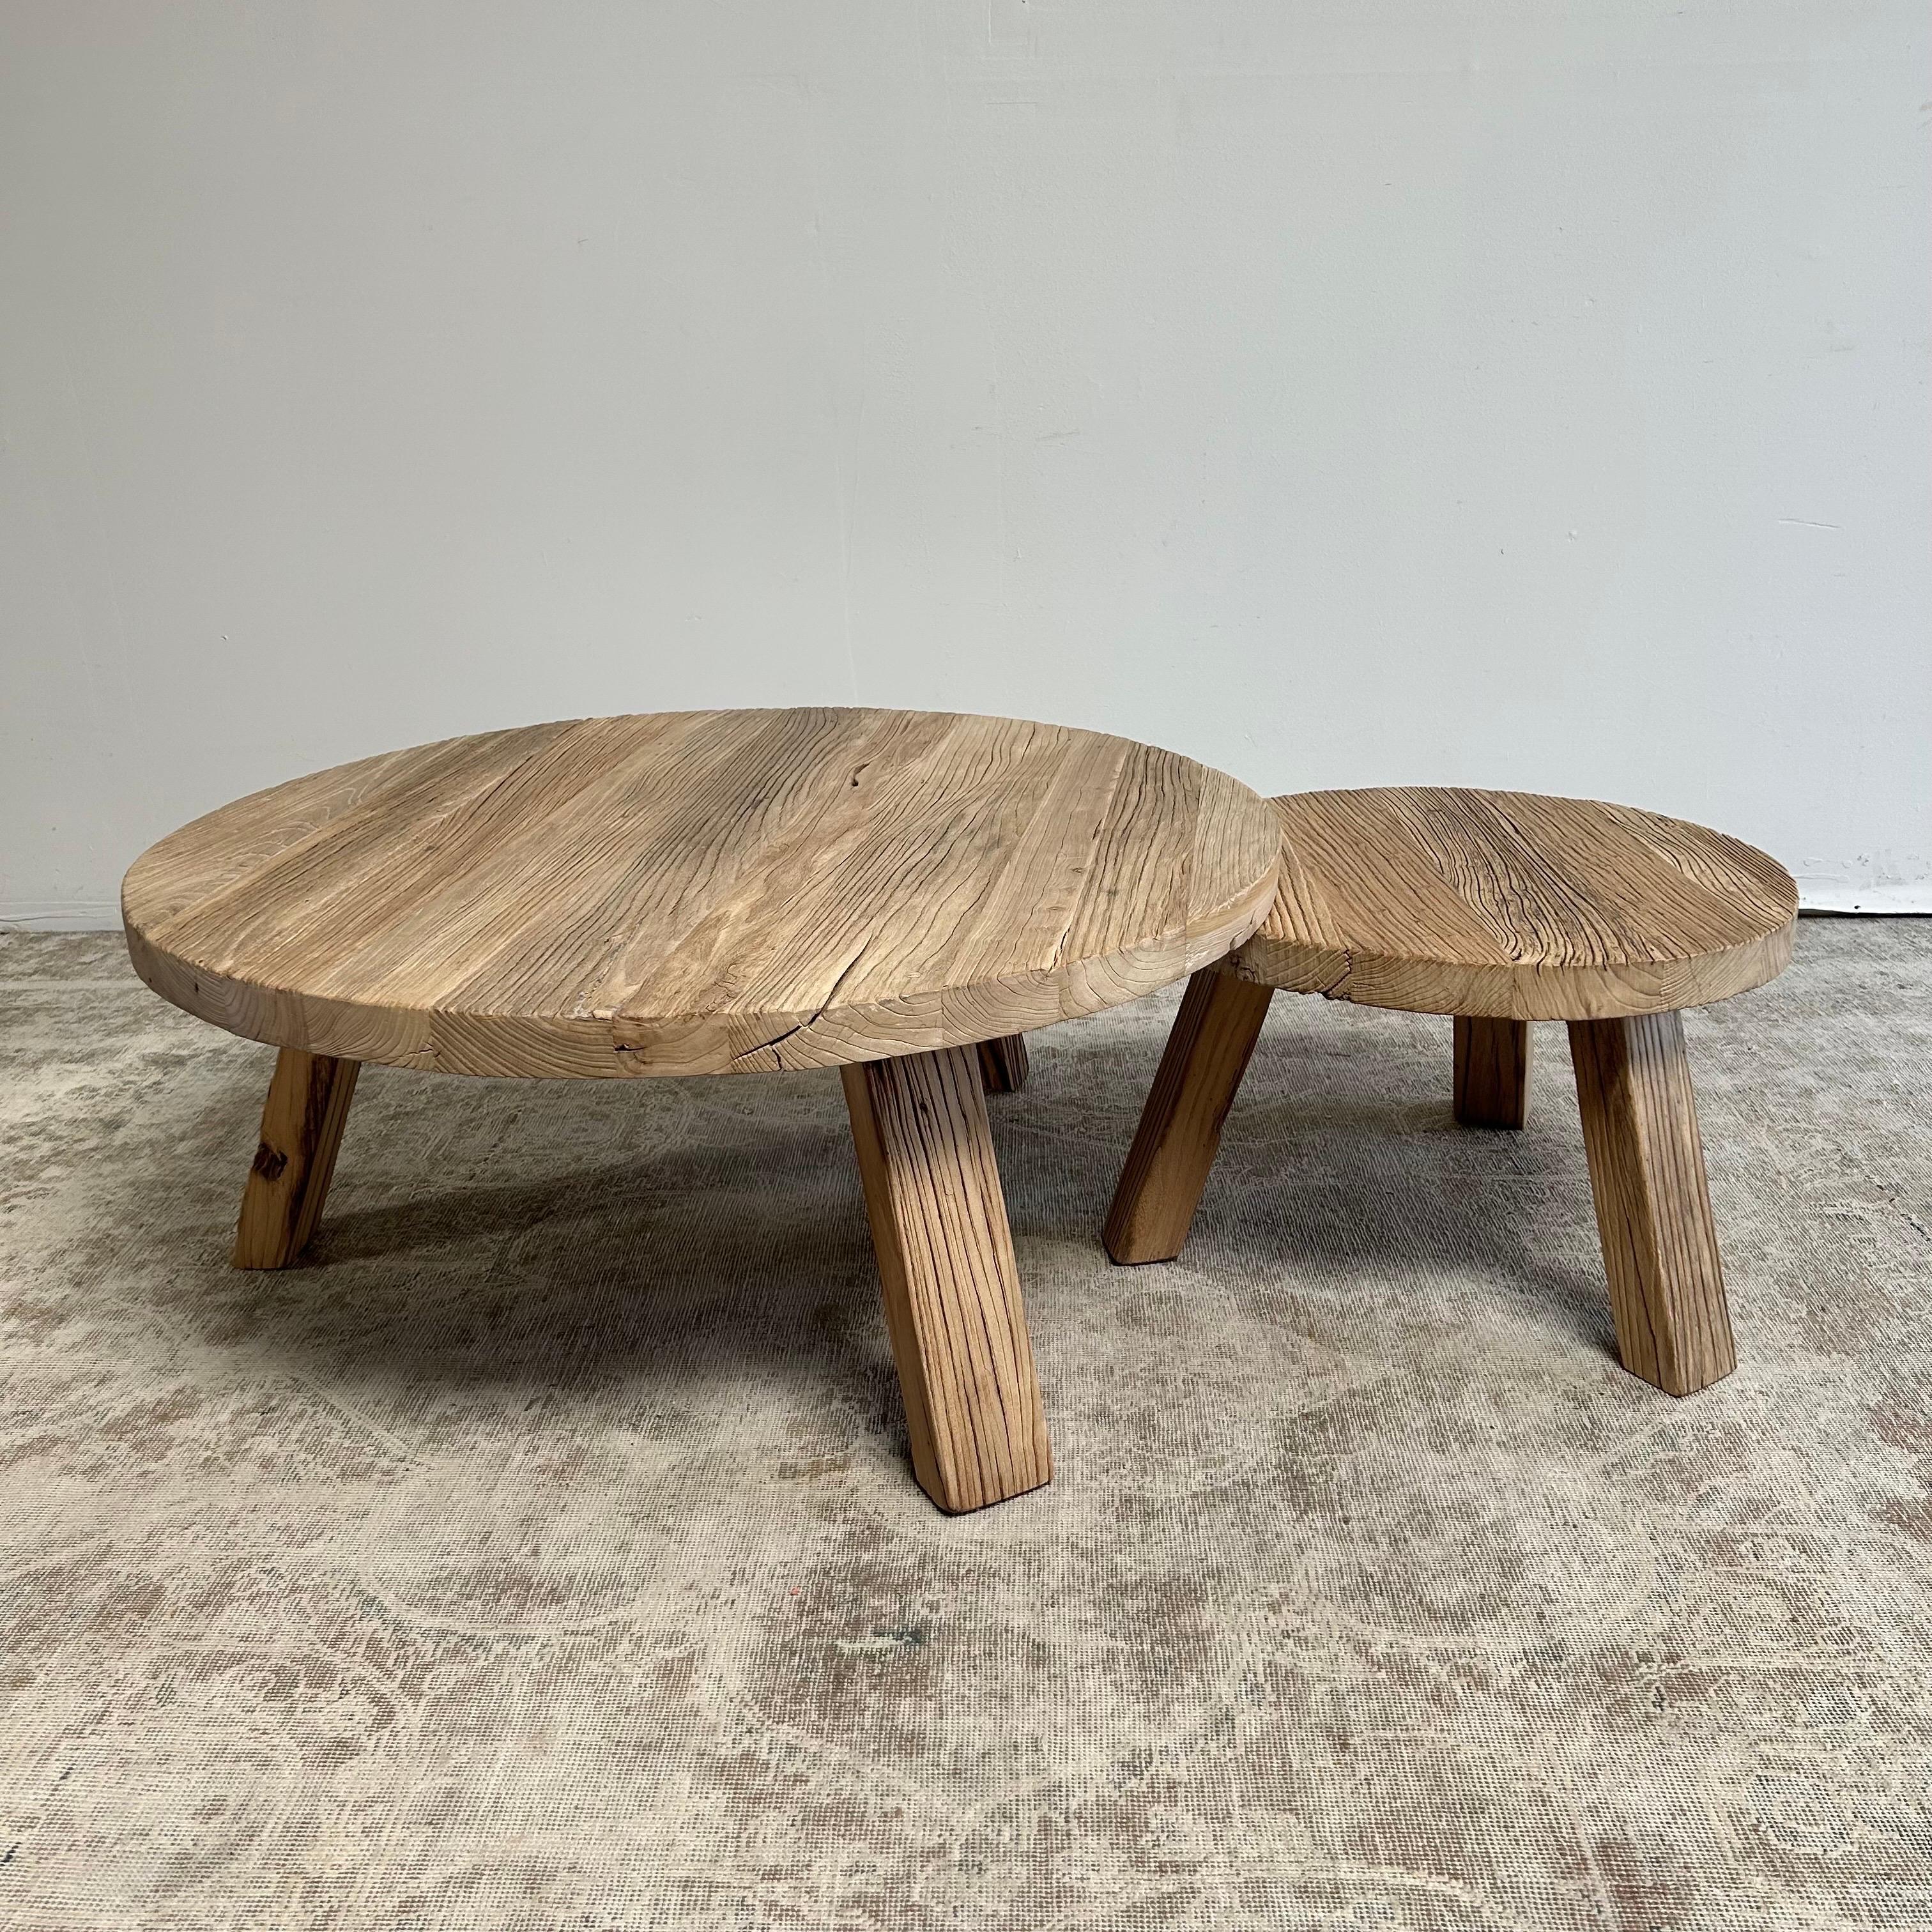 Reclaimed round Elm wood coffee table set.
Set of 2 elm wood coffee tables, 
Sizes: 42”rd. X 18”H 
Sizes: 24”rd. X 15-1/2”H
The smaller one will slide under the larger round to create a multi level set.
Also sold individually in separate